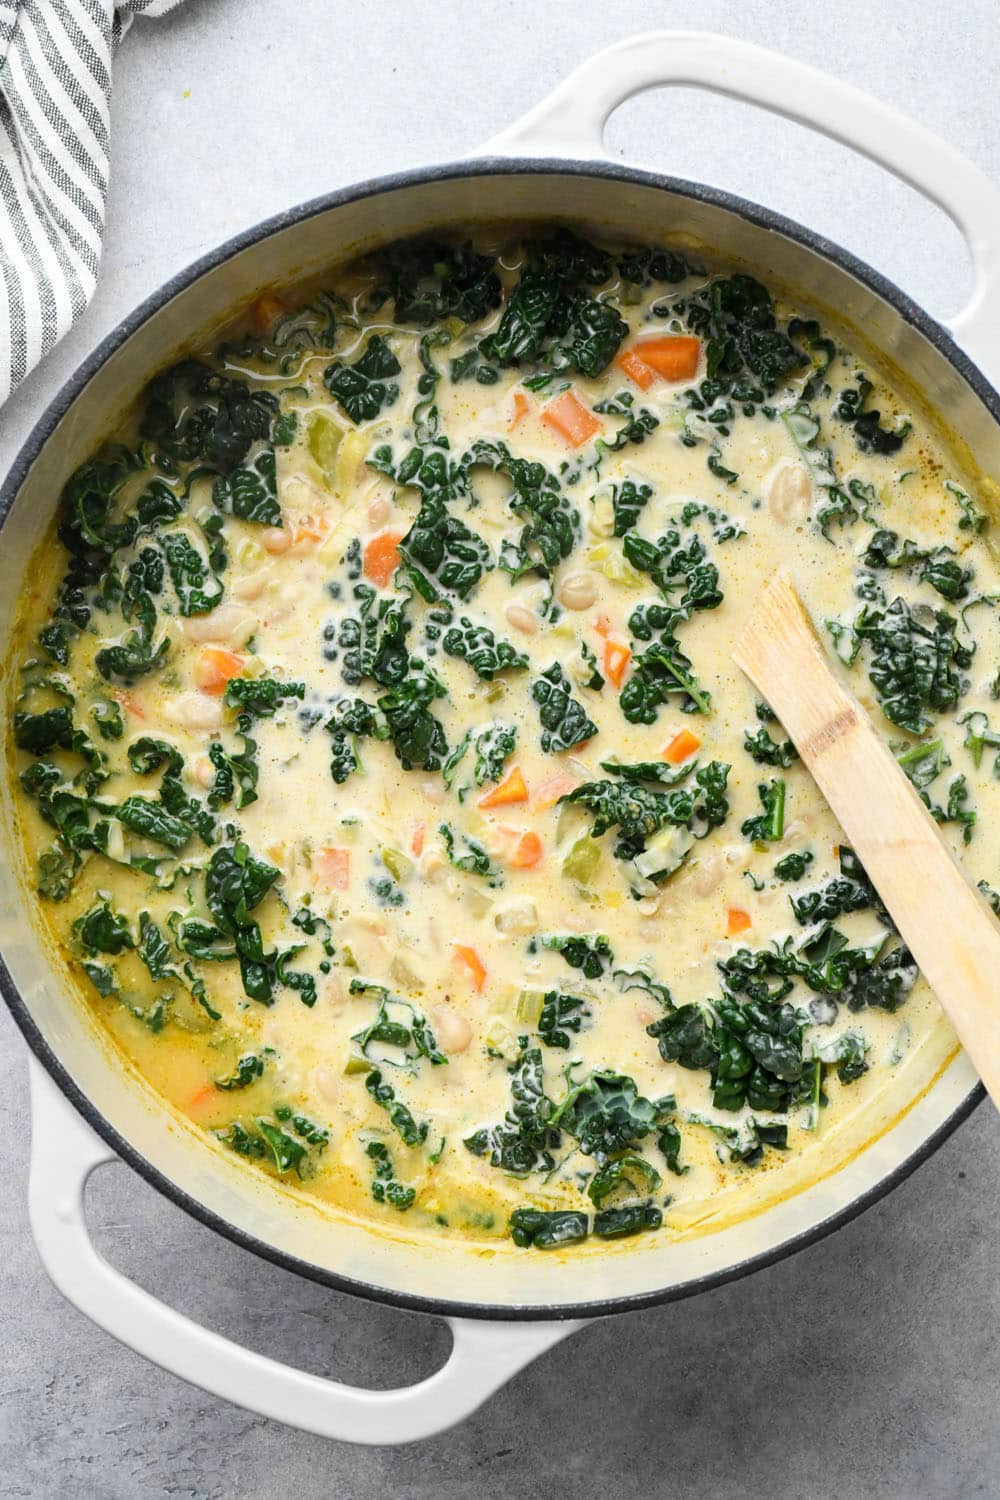 How to make White Bean and Kale Soup: Raw kale mixed into the soup.